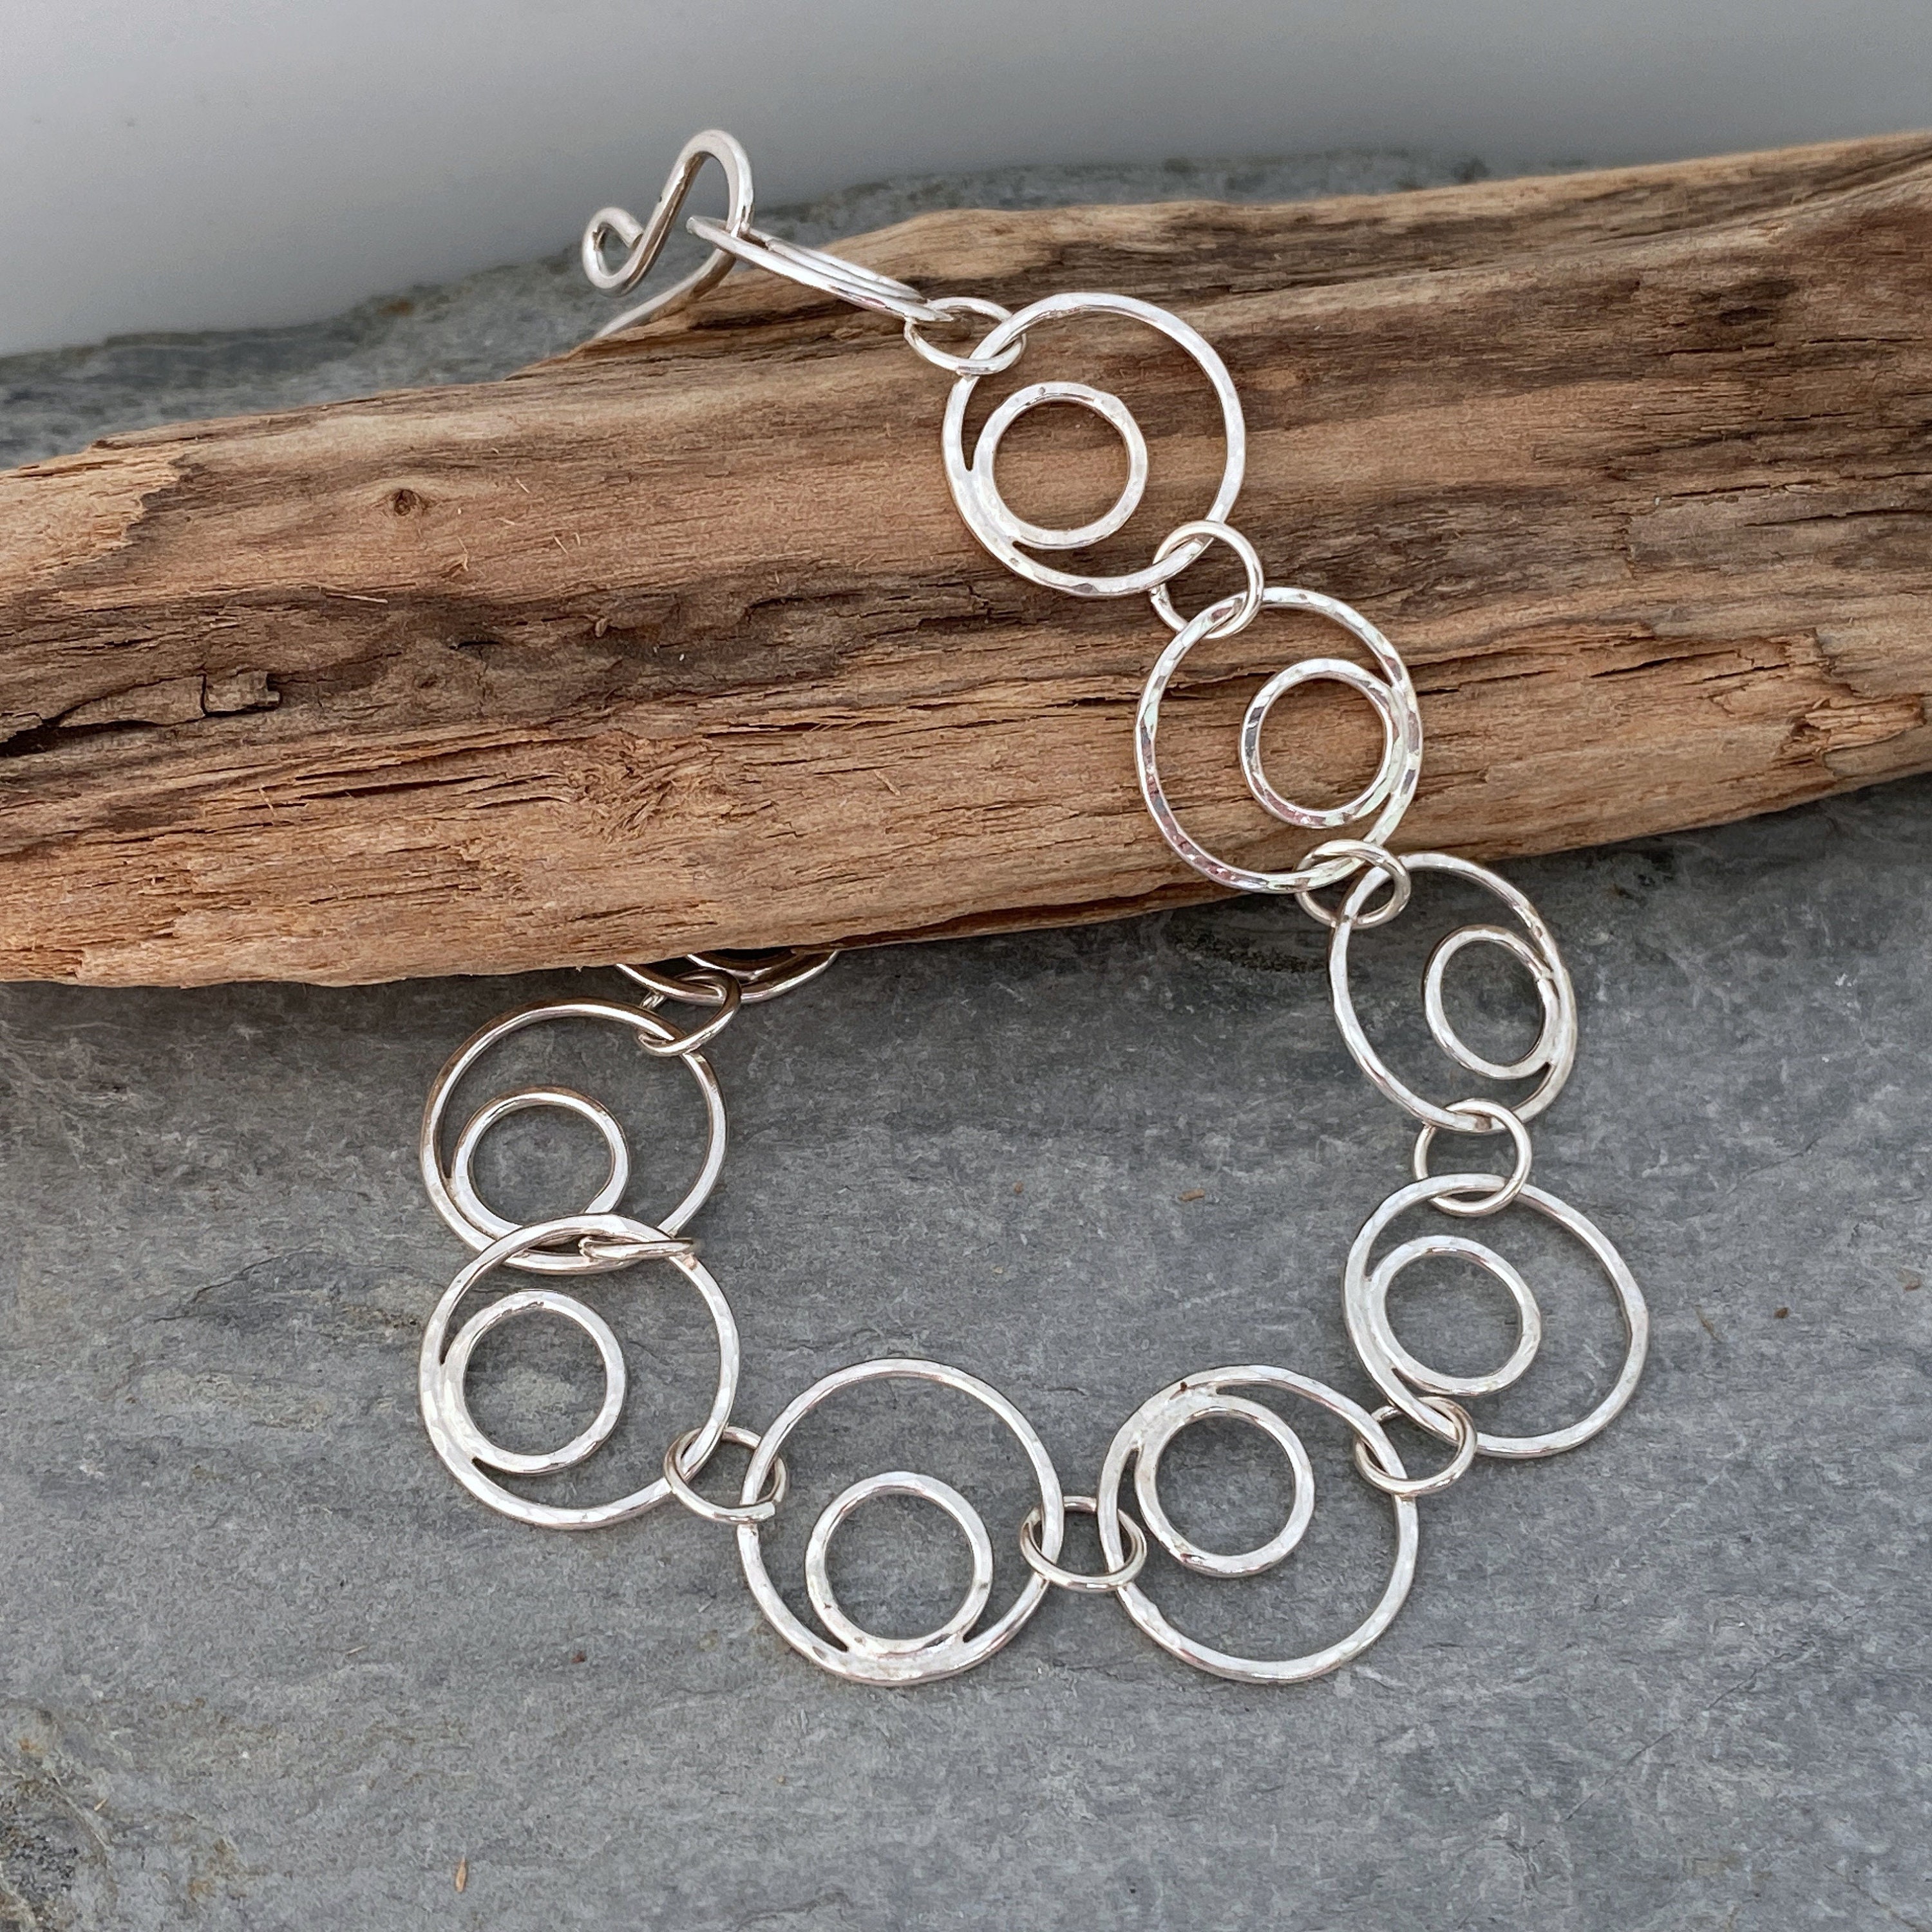 Silver Circles Bracelet, Solid Silver Handmade Bracelet Made From Hammered Circles, Bold Yet Elegant Jewellery, Unique Jewellery